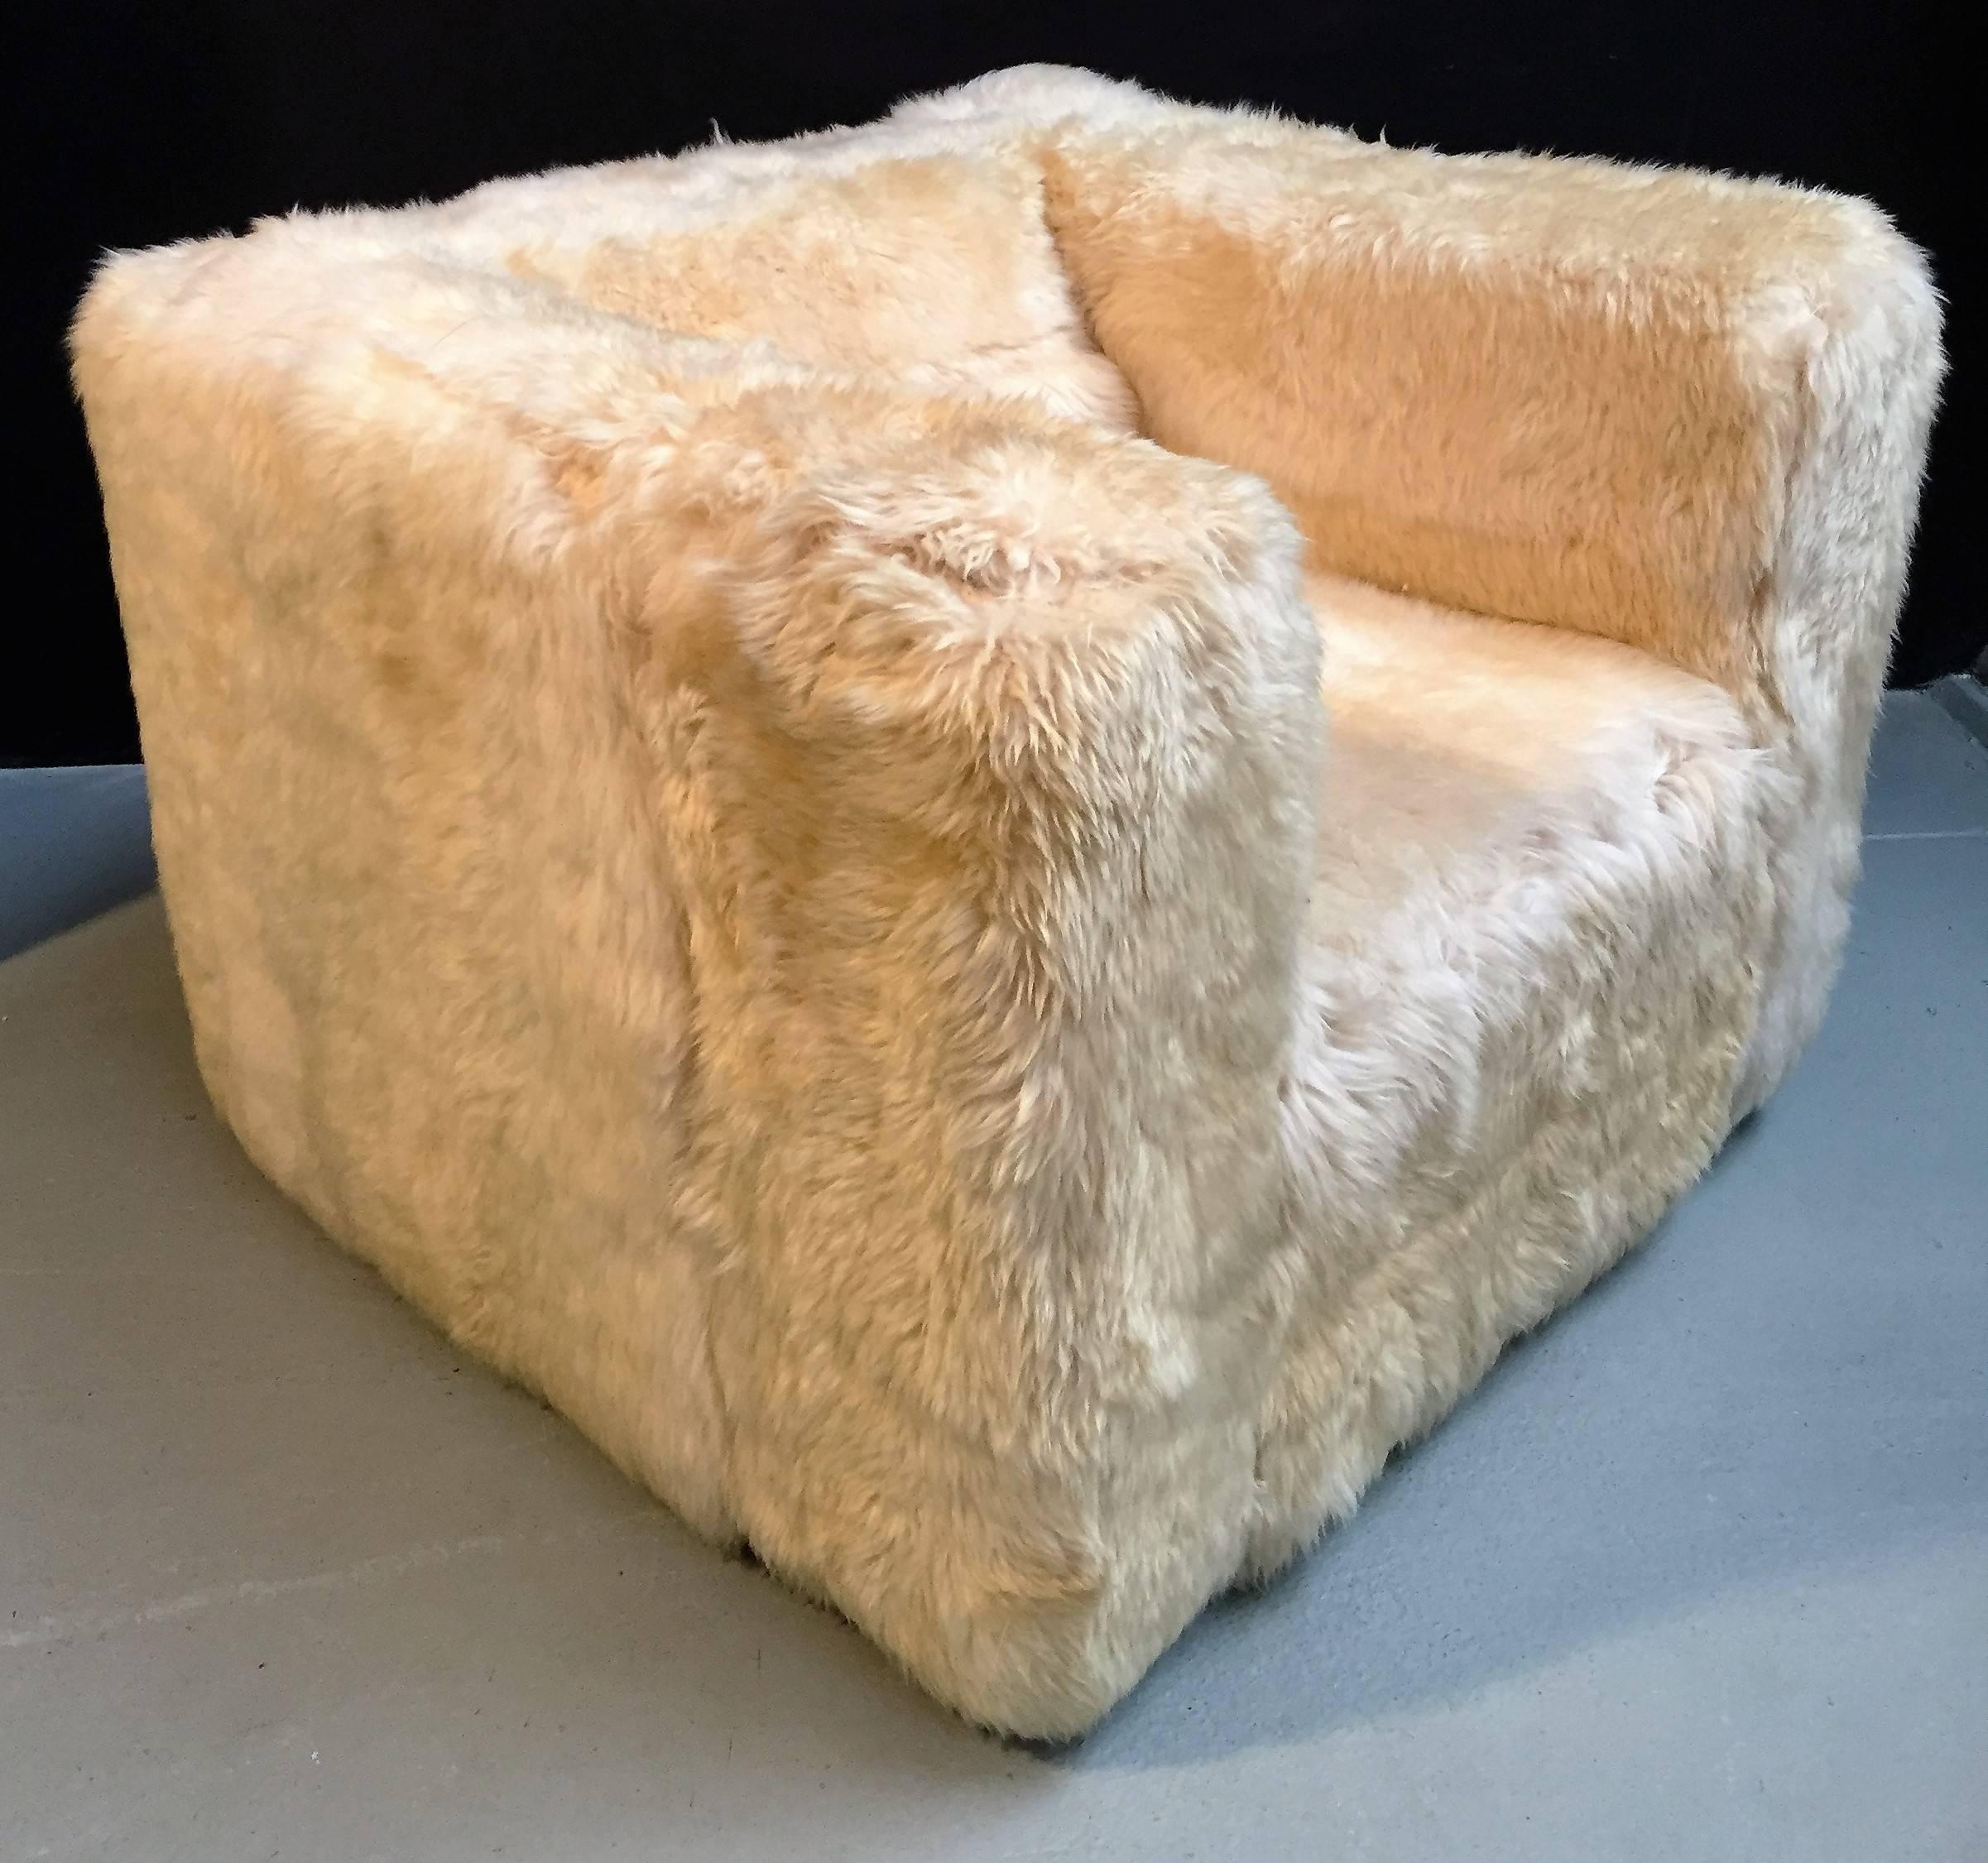 Comfortable cube chair upholstered with natural sheepskin.